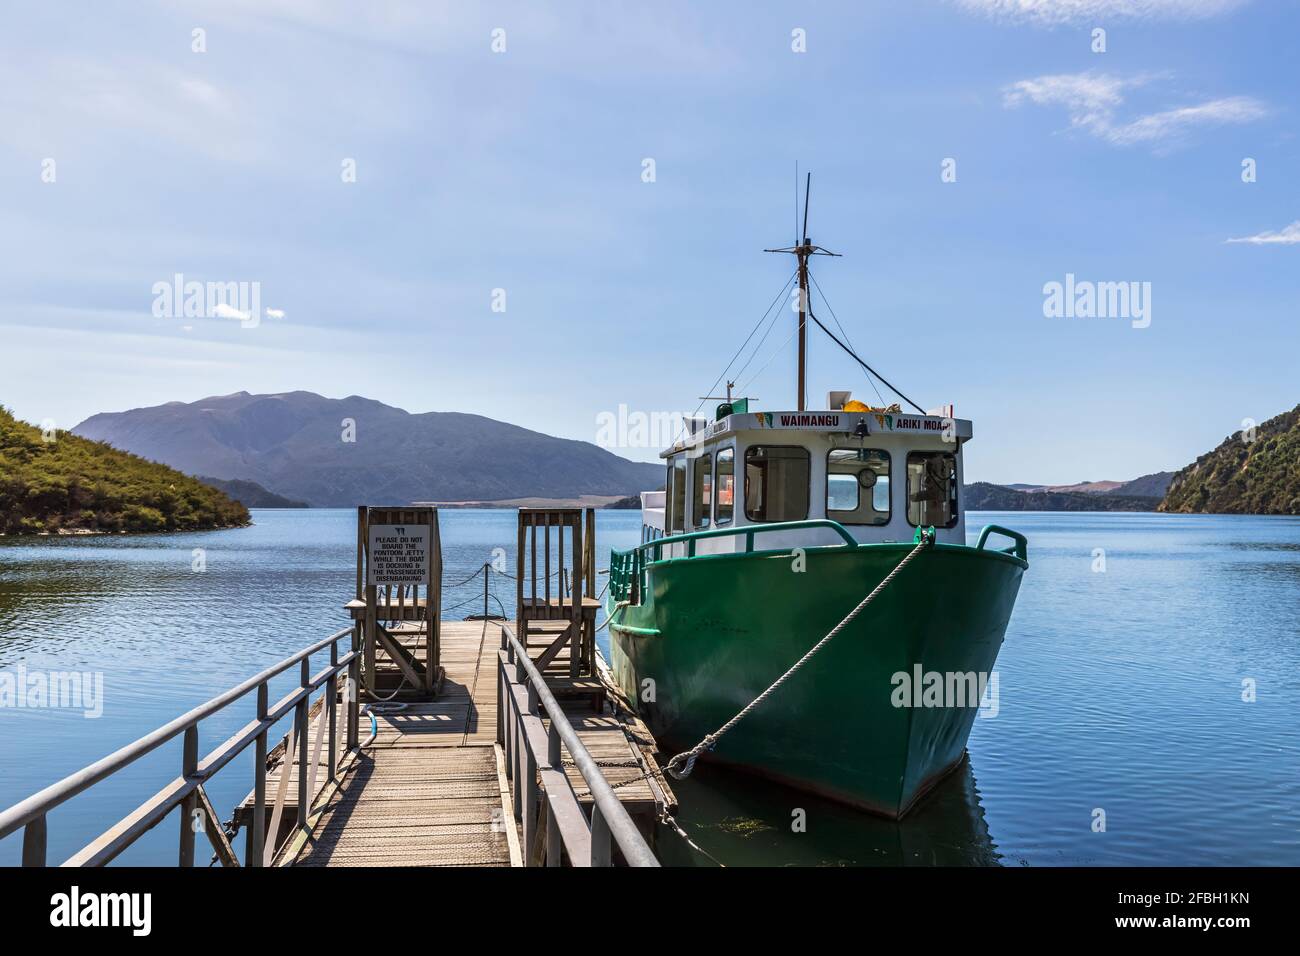 Fishboat moored by wooden pier Stock Photo